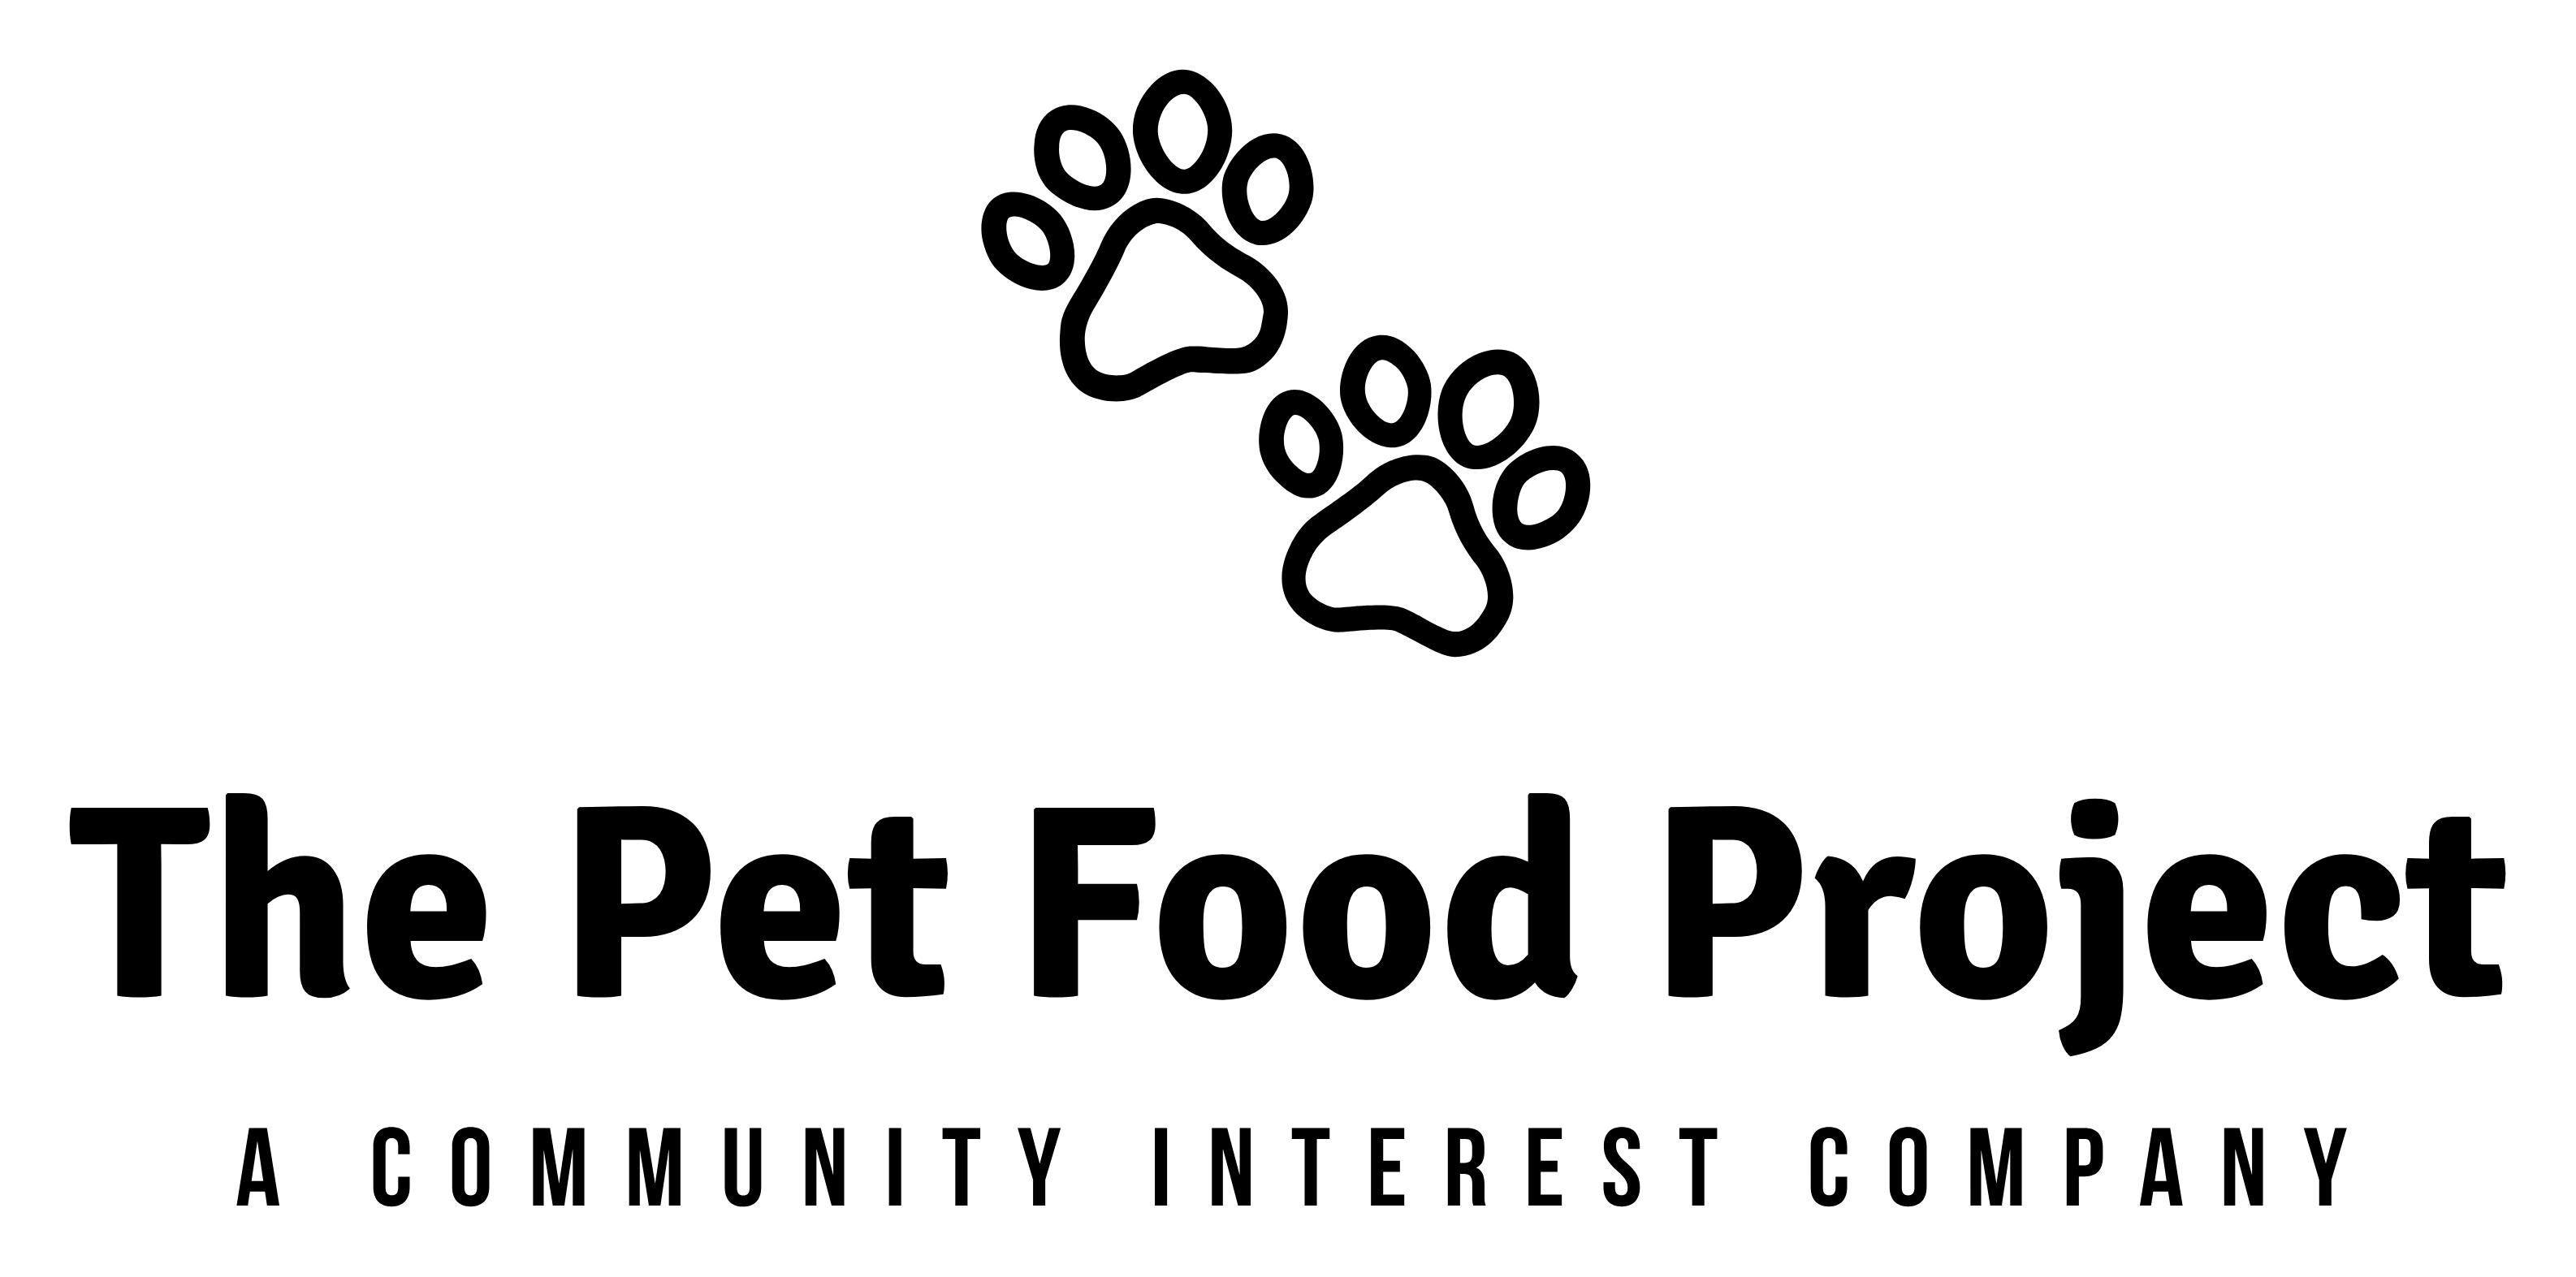 The Pet Food Project